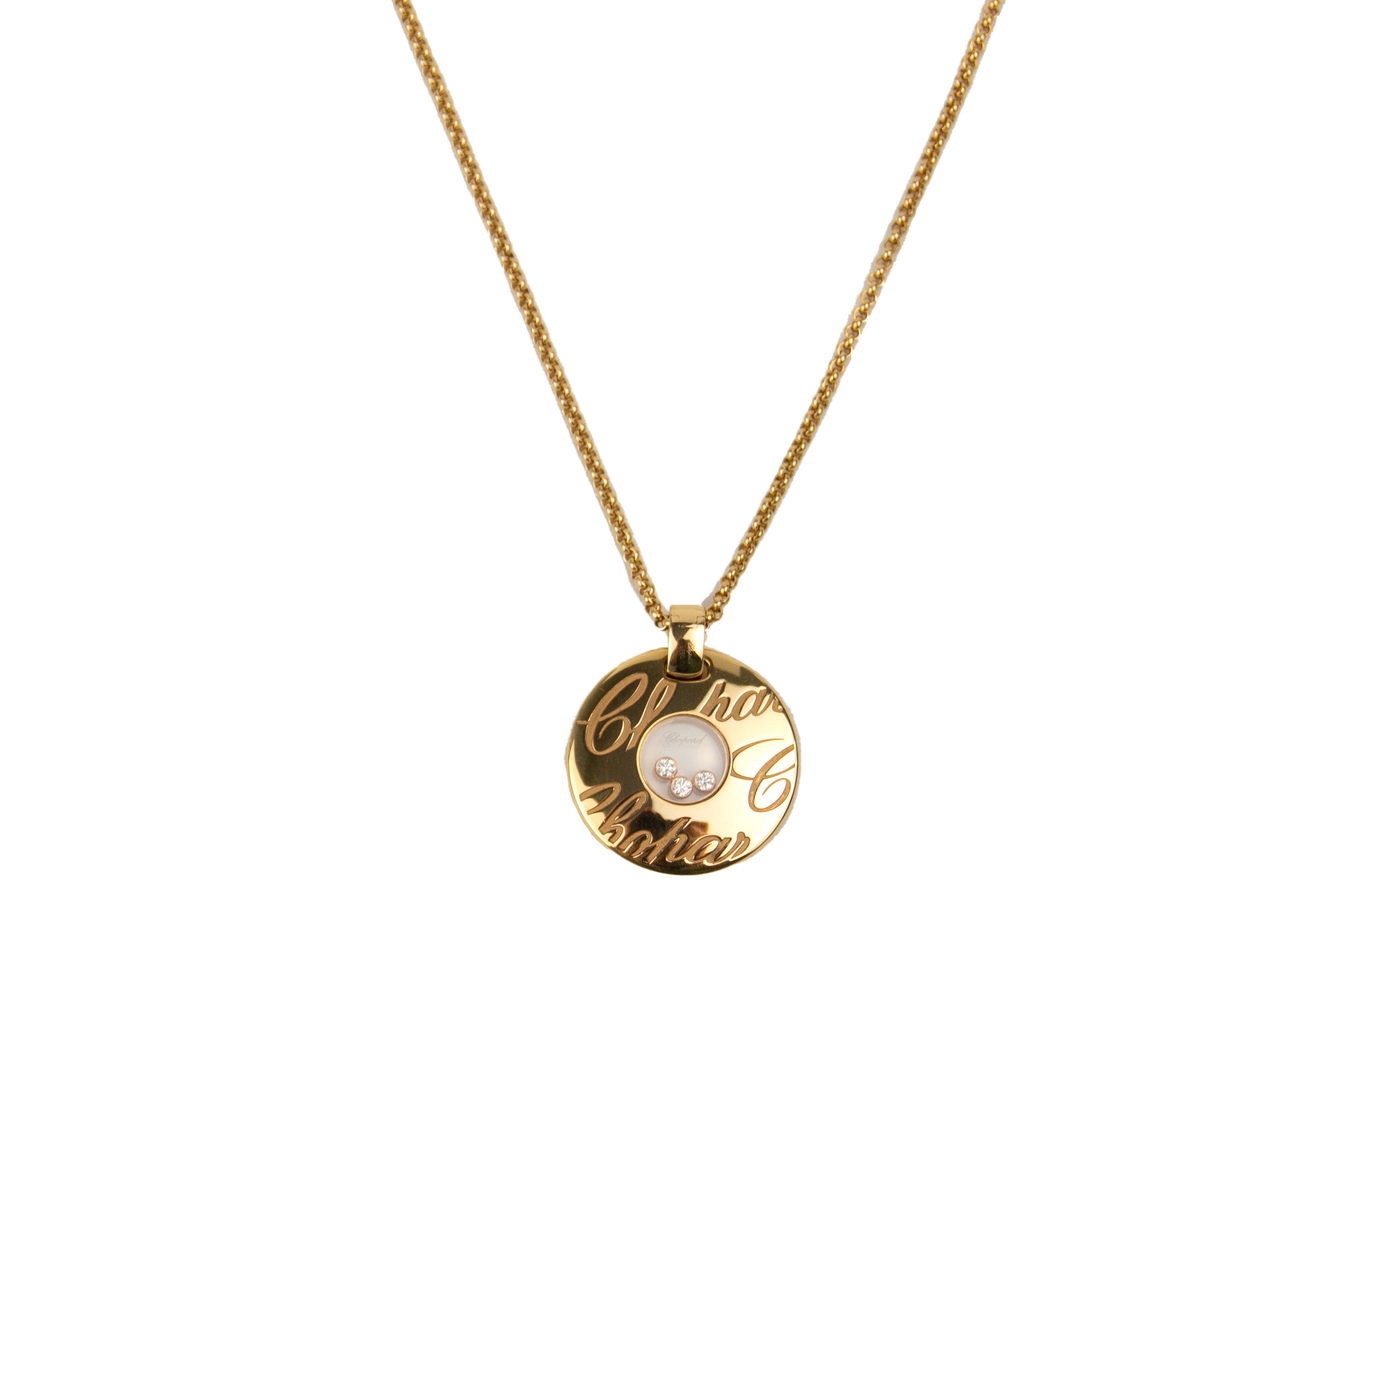 Chopard 18K Rose Gold "Chopardissimo" Necklace